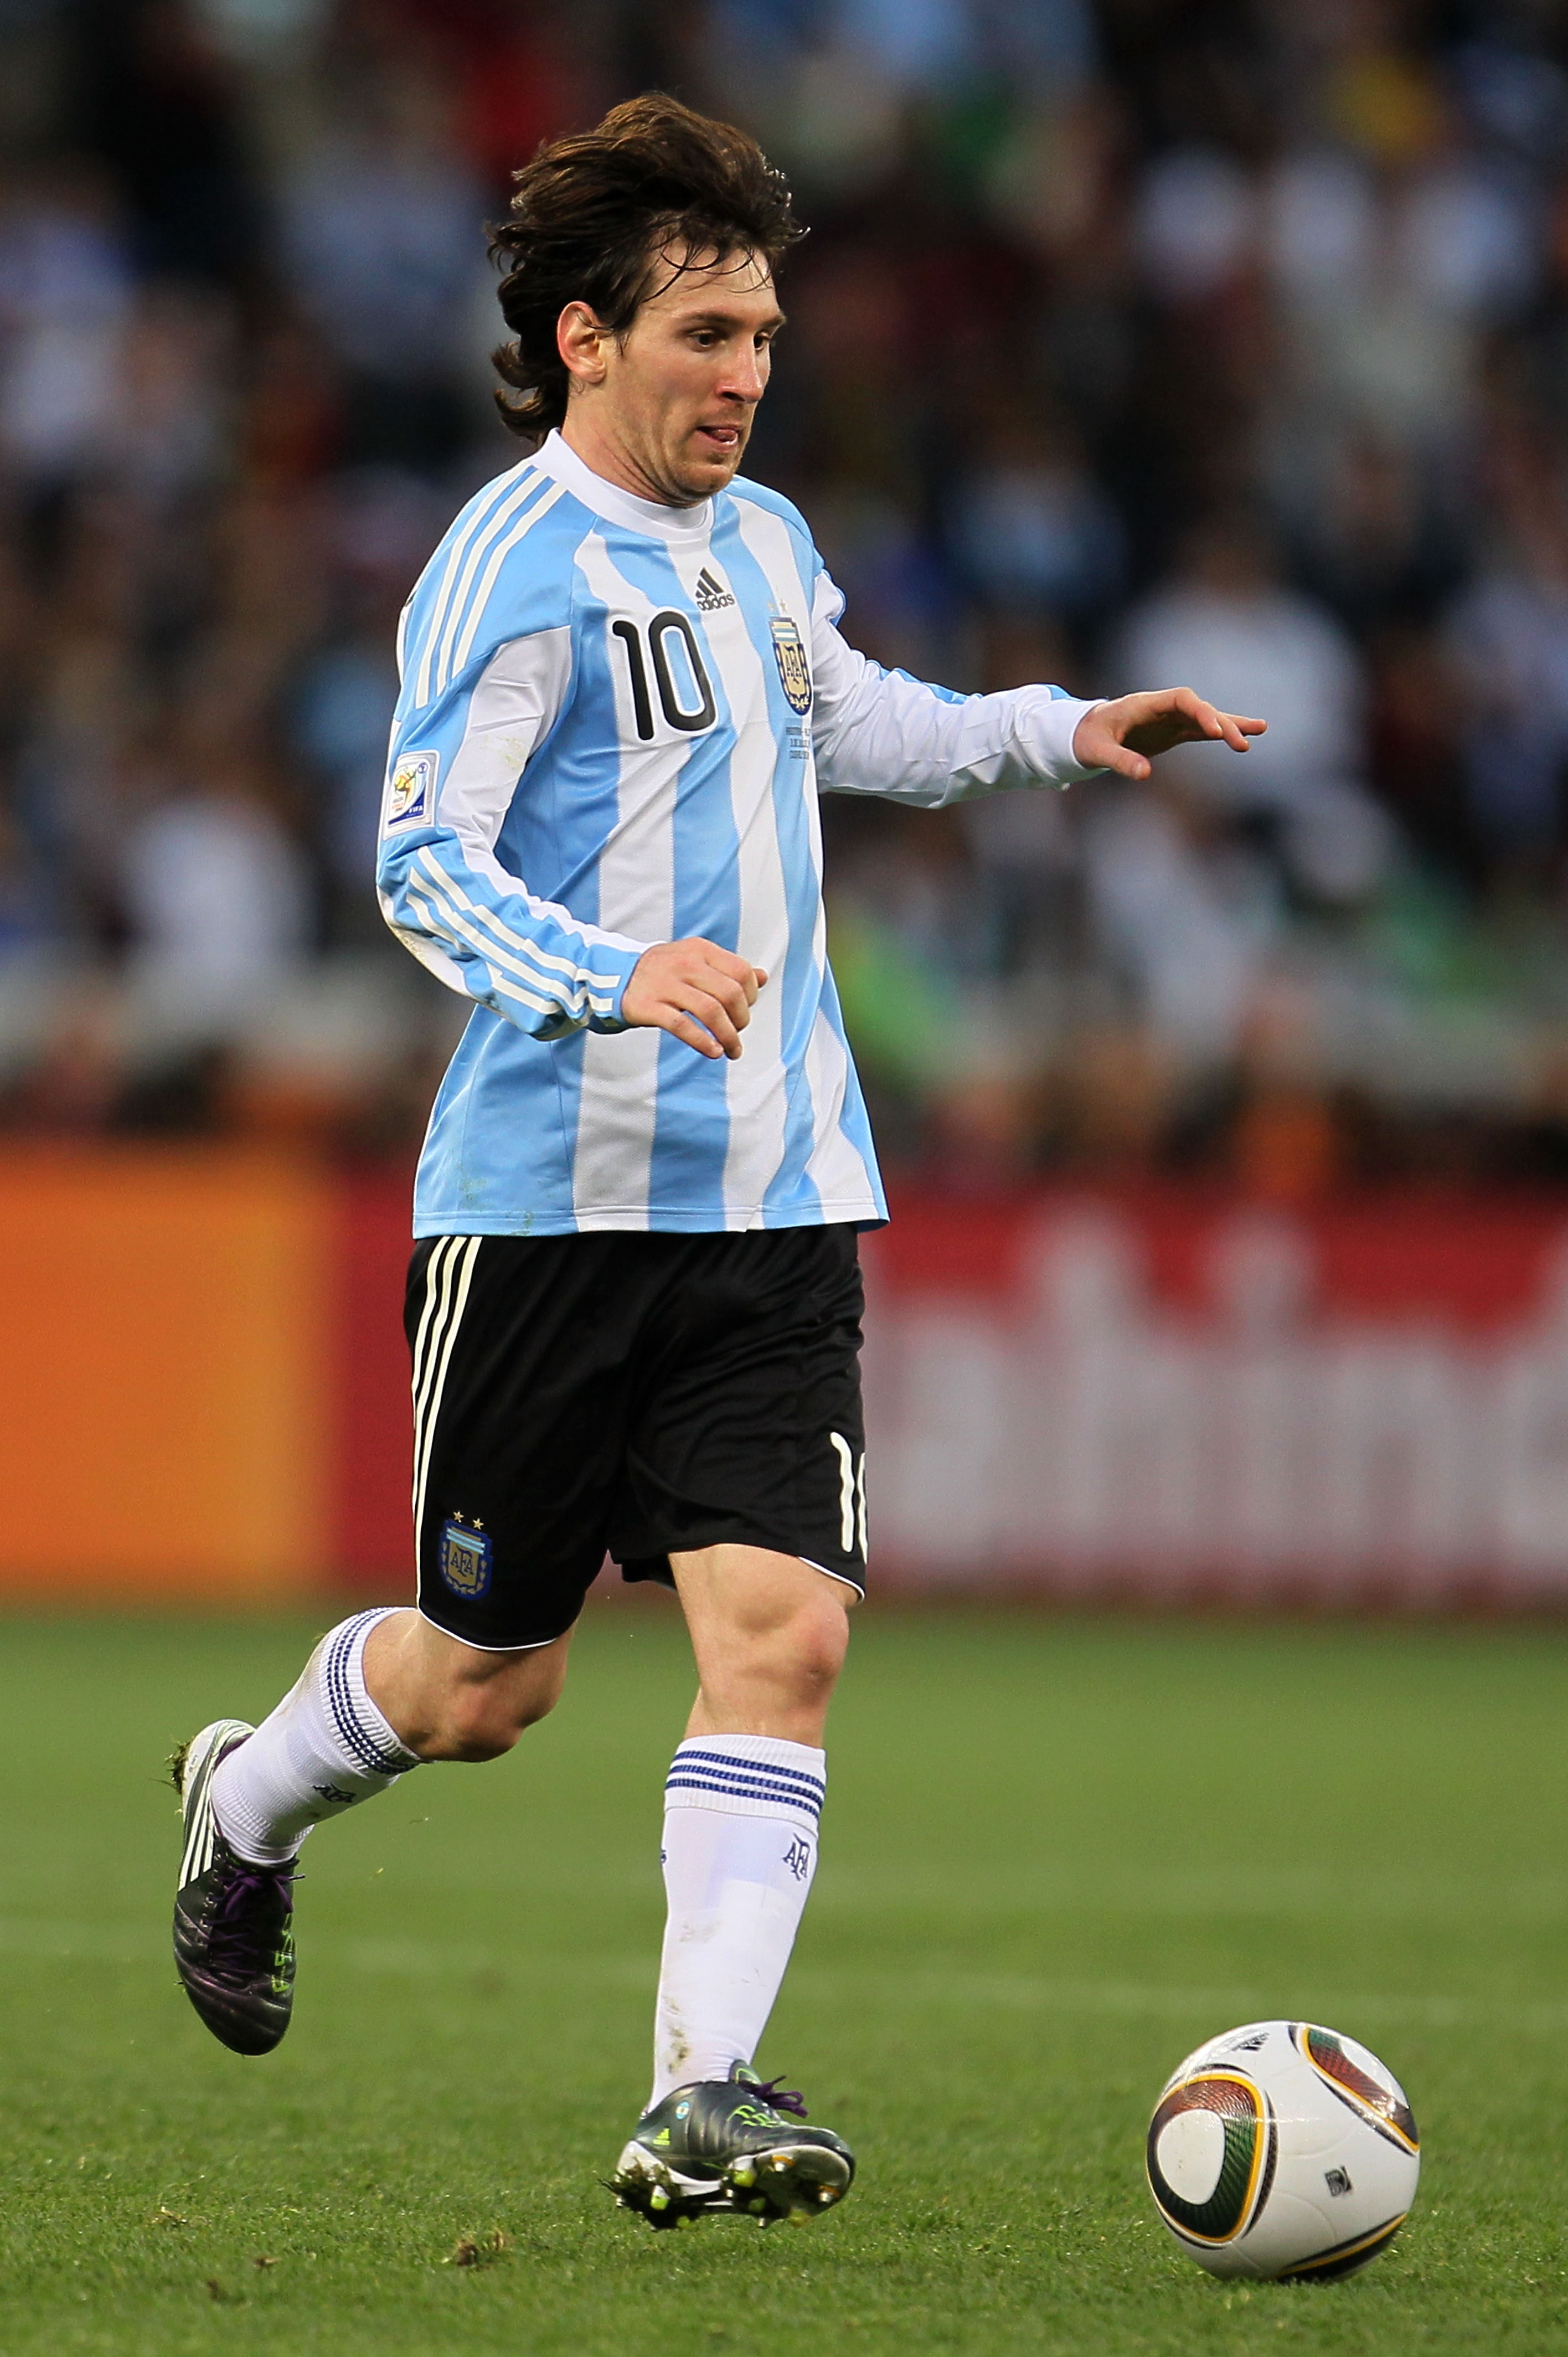 CAPE TOWN, SOUTH AFRICA - JULY 03:  Lionel Messi of Argentina in action during the 2010 FIFA World Cup South Africa Quarter Final match between Argentina and Germany at Green Point Stadium on July 3, 2010 in Cape Town, South Africa.  (Photo by Chris McGra